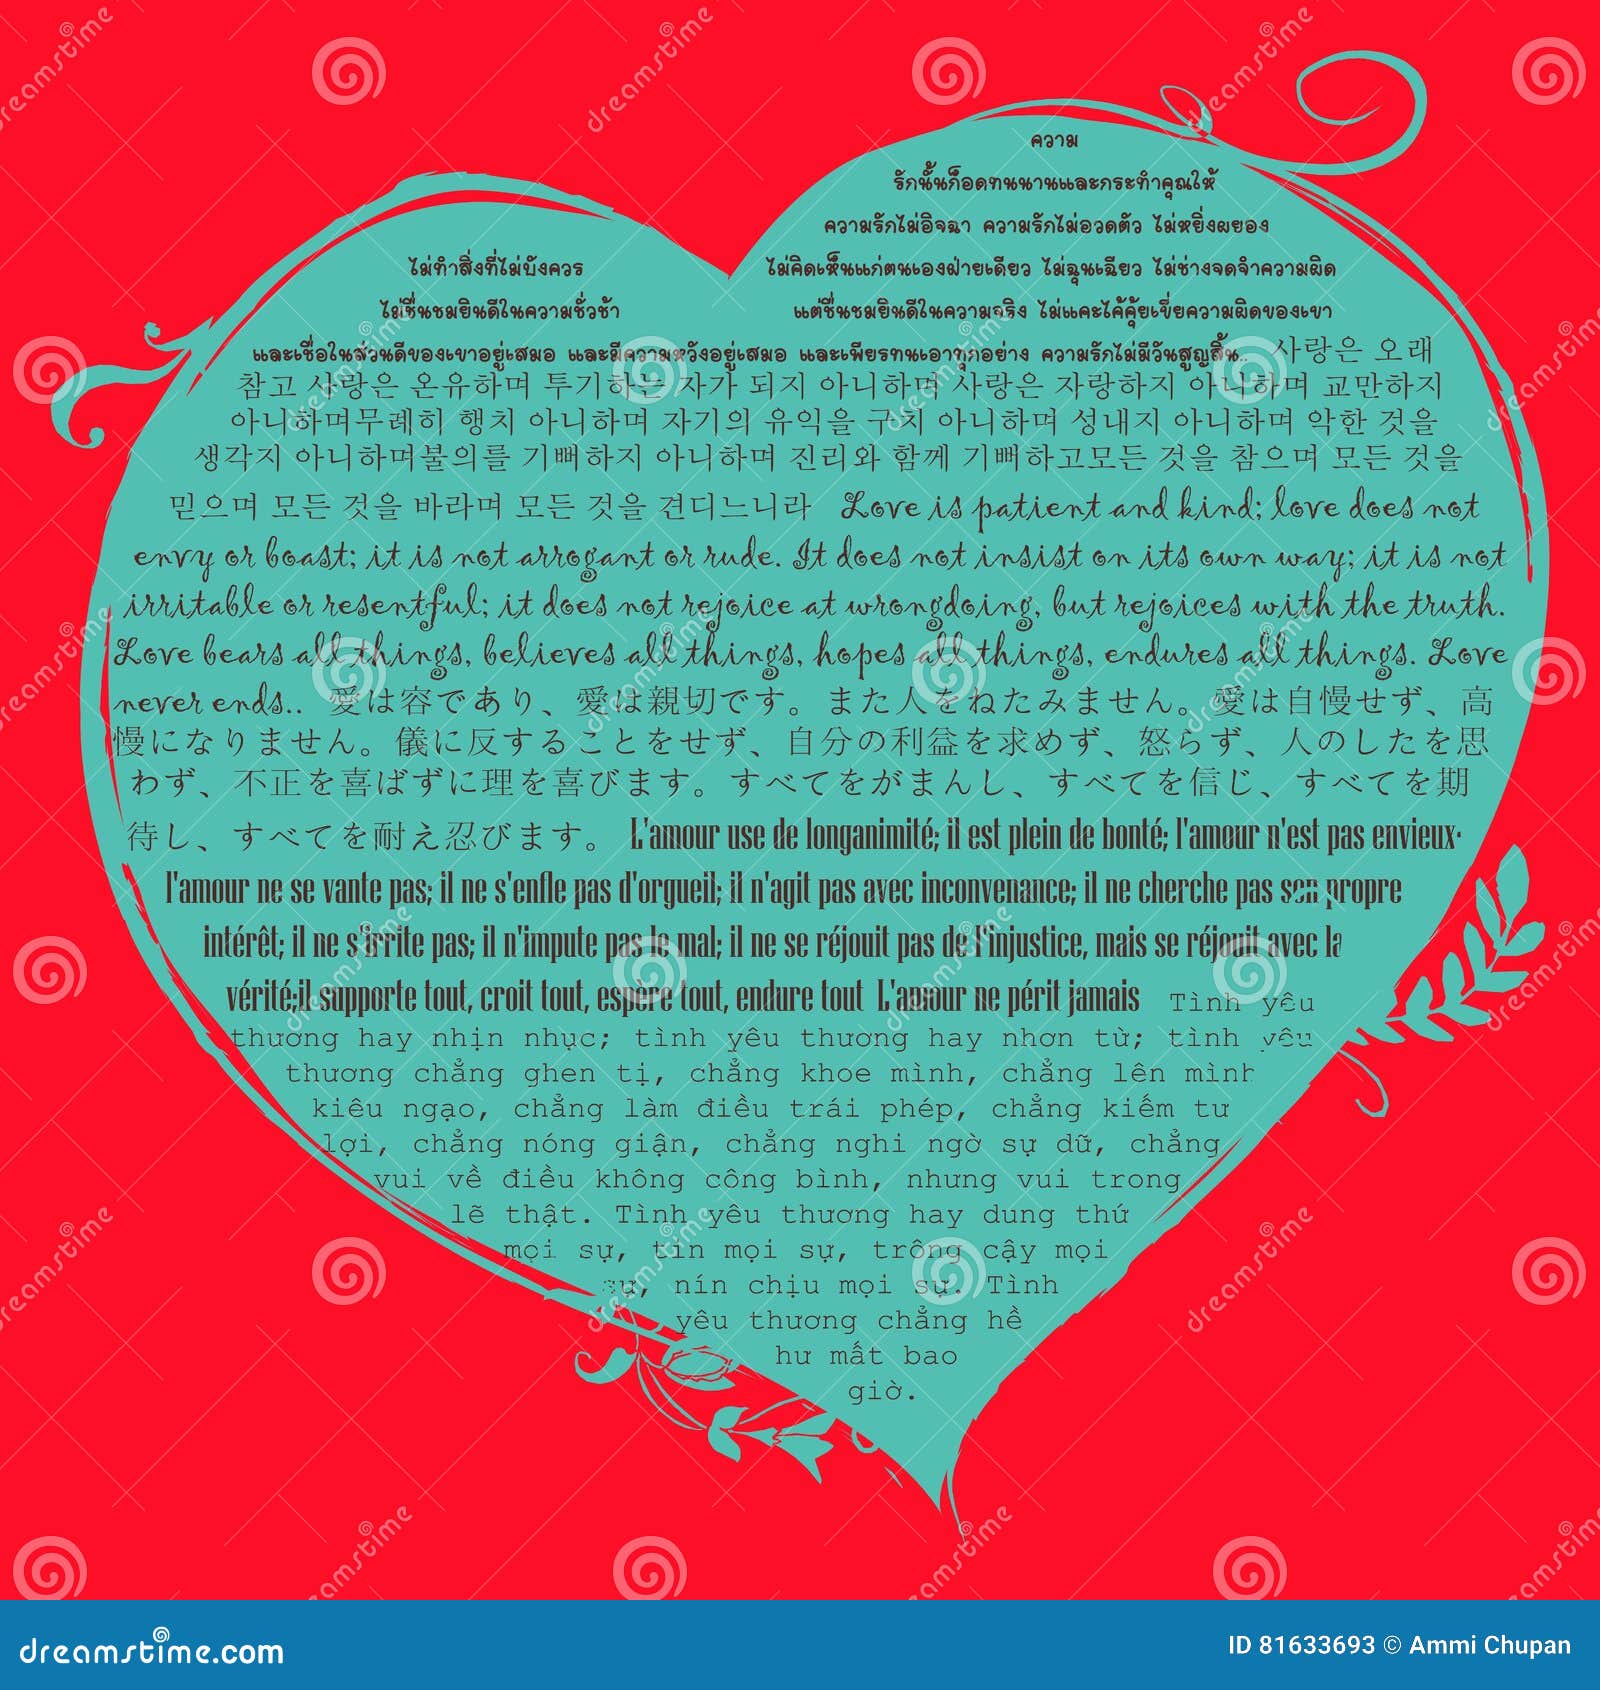 Blue heart shape on red background with christian bible verse in 1 Corinthian 13 in many language